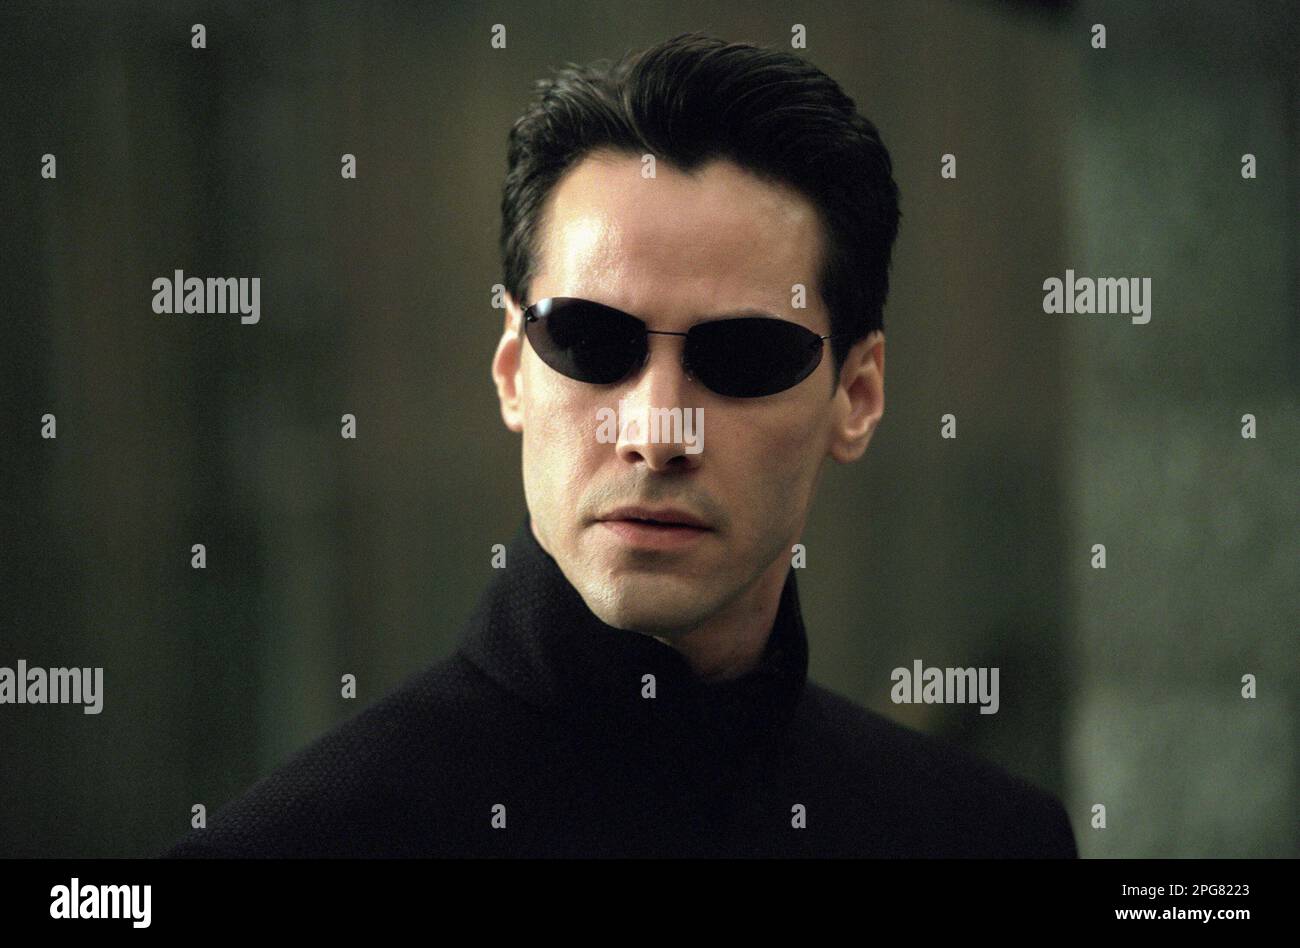 The Matrix Reloaded  Keanu Reeves    Director - Lana Wachowski, Lilly Wachowski  May 2003  FP The Matrix Reloaded 03   FlixPix/Warner Bros.  For editorial use only.  Copyright of Warner Bros. and/or the Photographer assigned by the Movie or Production Company.  A Mandatory Credit To the movie company is required.  Strictly for use for the promotion of the above film unless written authority gained via the movie company is obtained by the end-user.  FlixPix is NOT the copyright owner & acts solely as a service of supply to recognised media outlets. Stock Photo